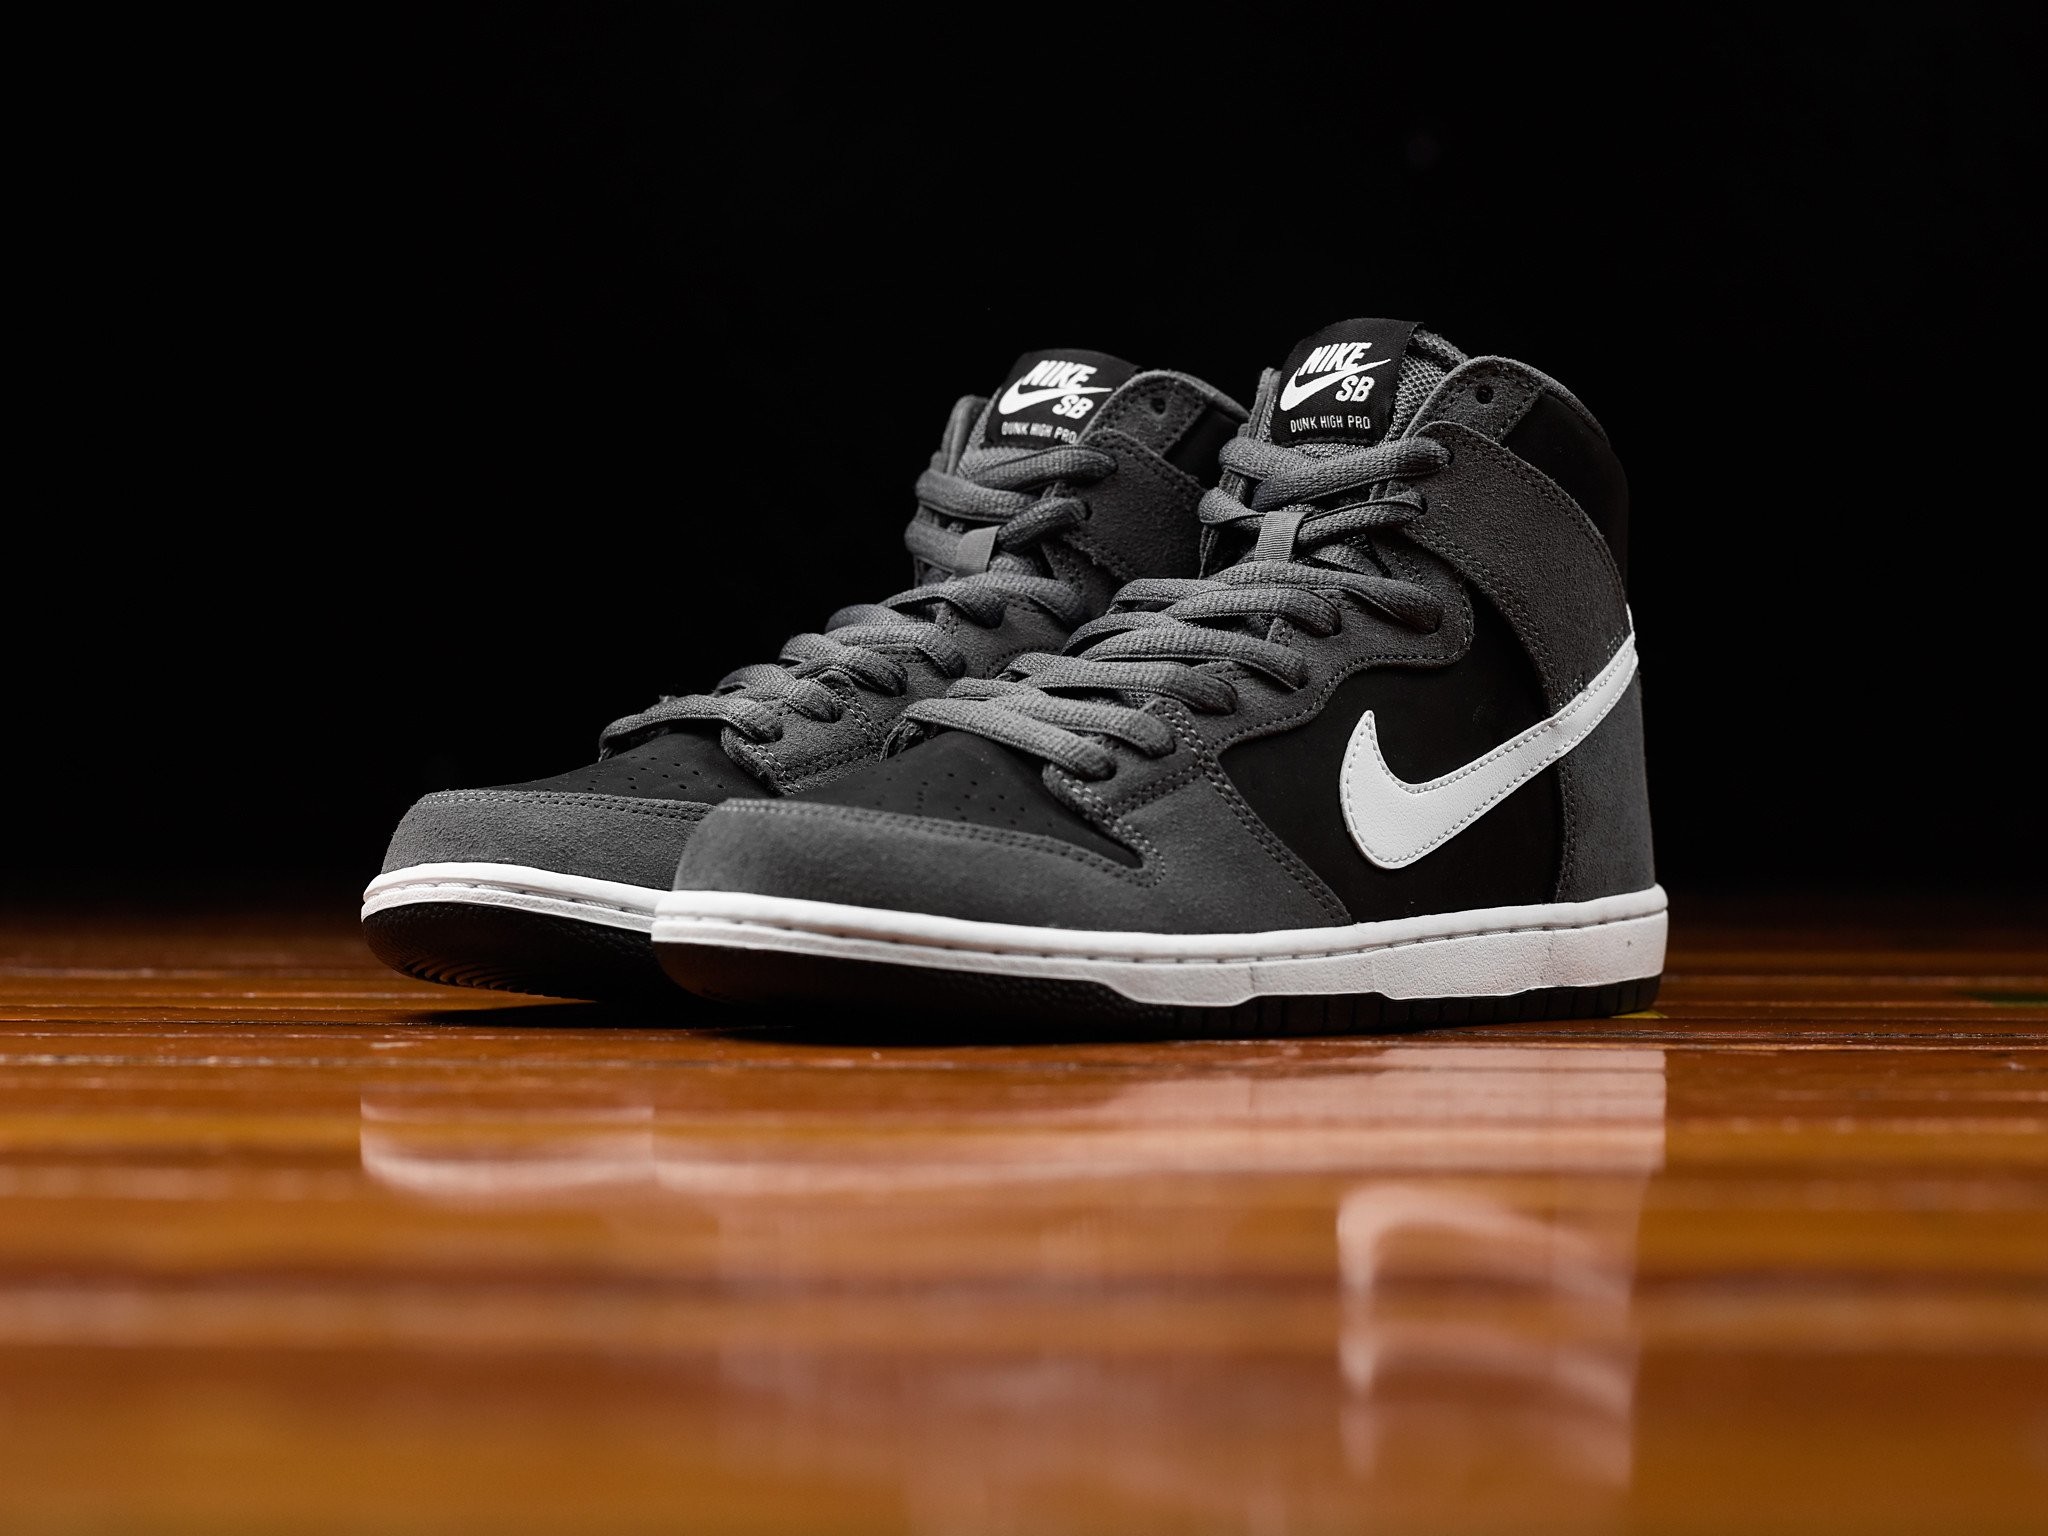 2048x1536 More Images Of The Nike SB Dunk High Pro Shadow